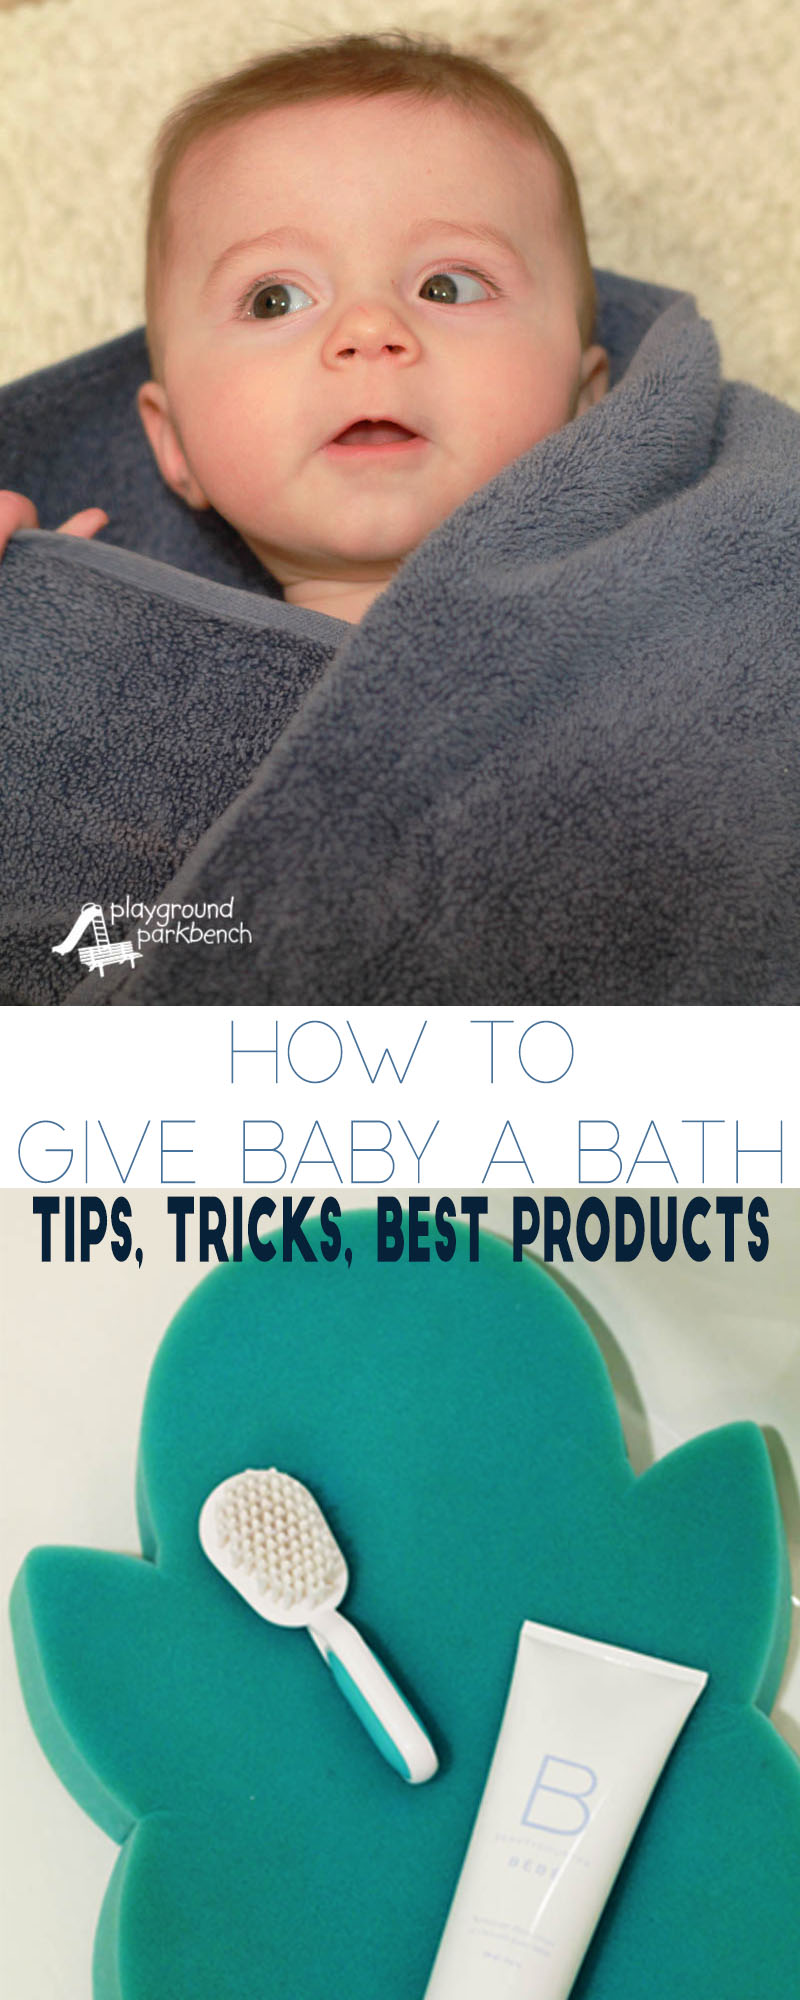 How to Give Baby a Bath - Giving your newborn baby their first bath can be scary!  They are tiny, floppy and super slippery when wet and soapy.  After 3 babies of my own, learn my best mom tips, tricks and product recommendations to keep your baby clean, and free from toxic chemicals. | Baby | Baby Care | First Time Mom | What to Expect | Newborns | Bath | Baby Gear | Baby Registry | Beautycounter |